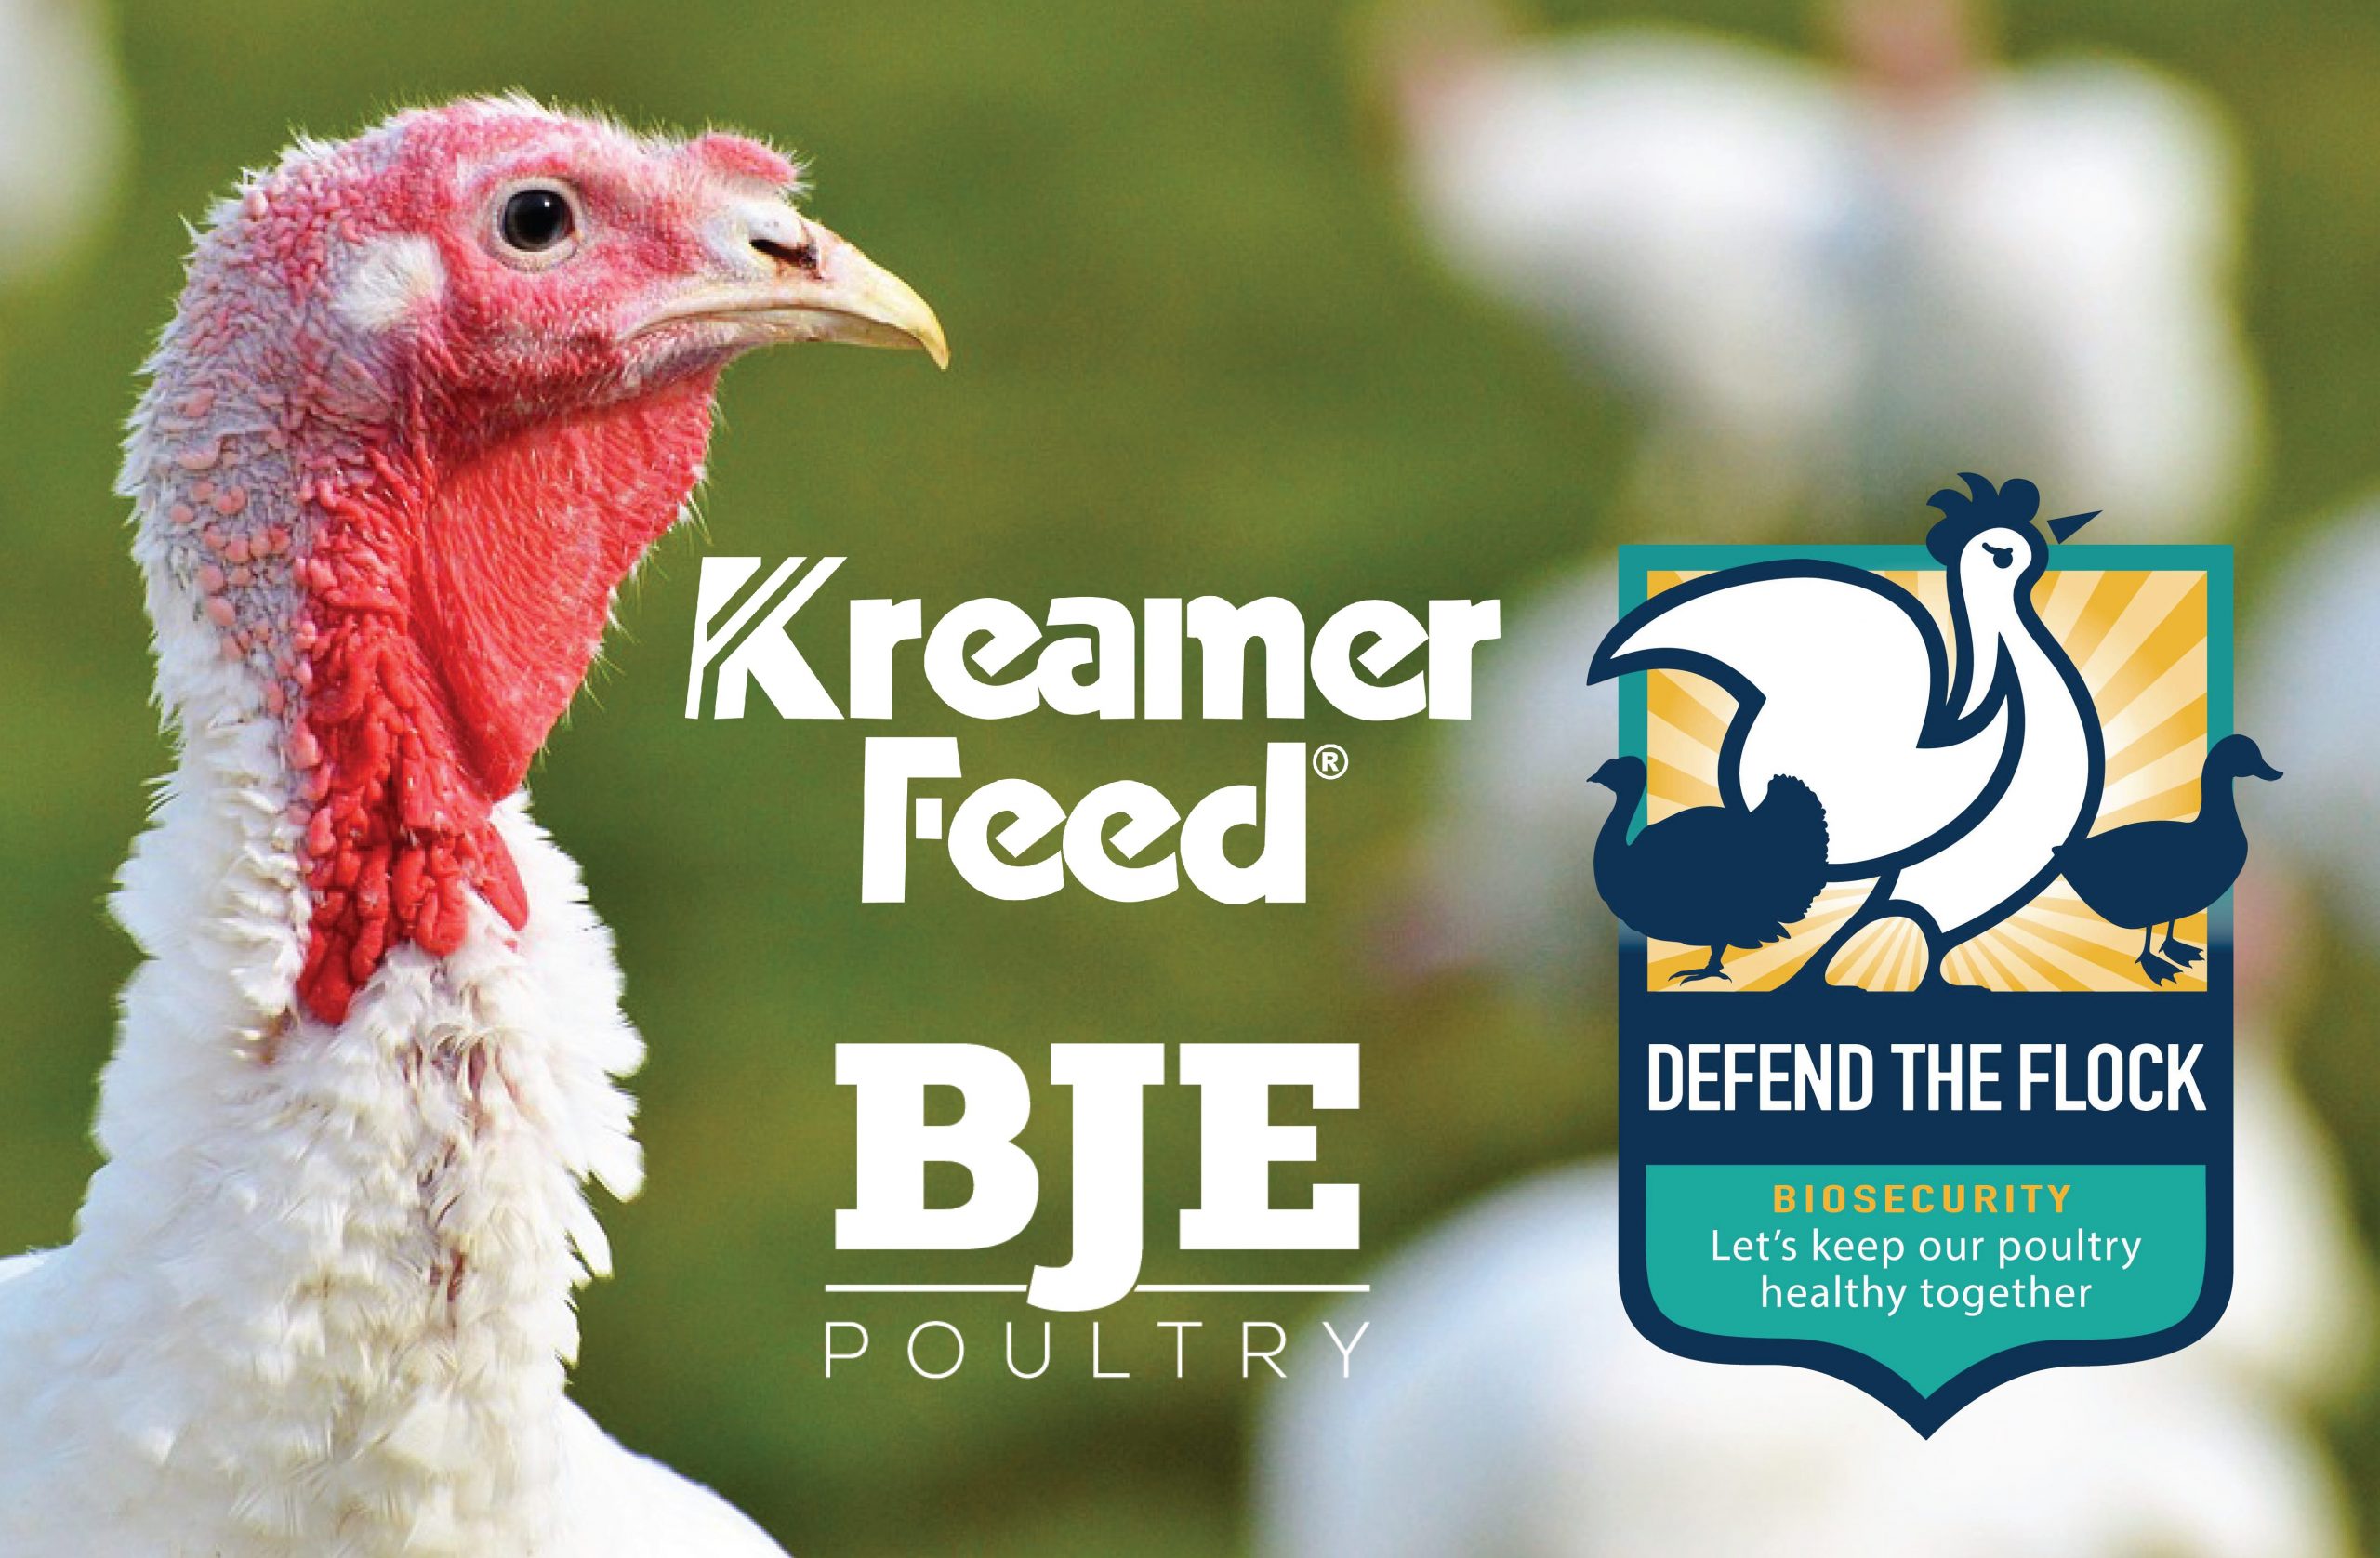 Kreamer Feed and BJE Poultry - Defend the Flock